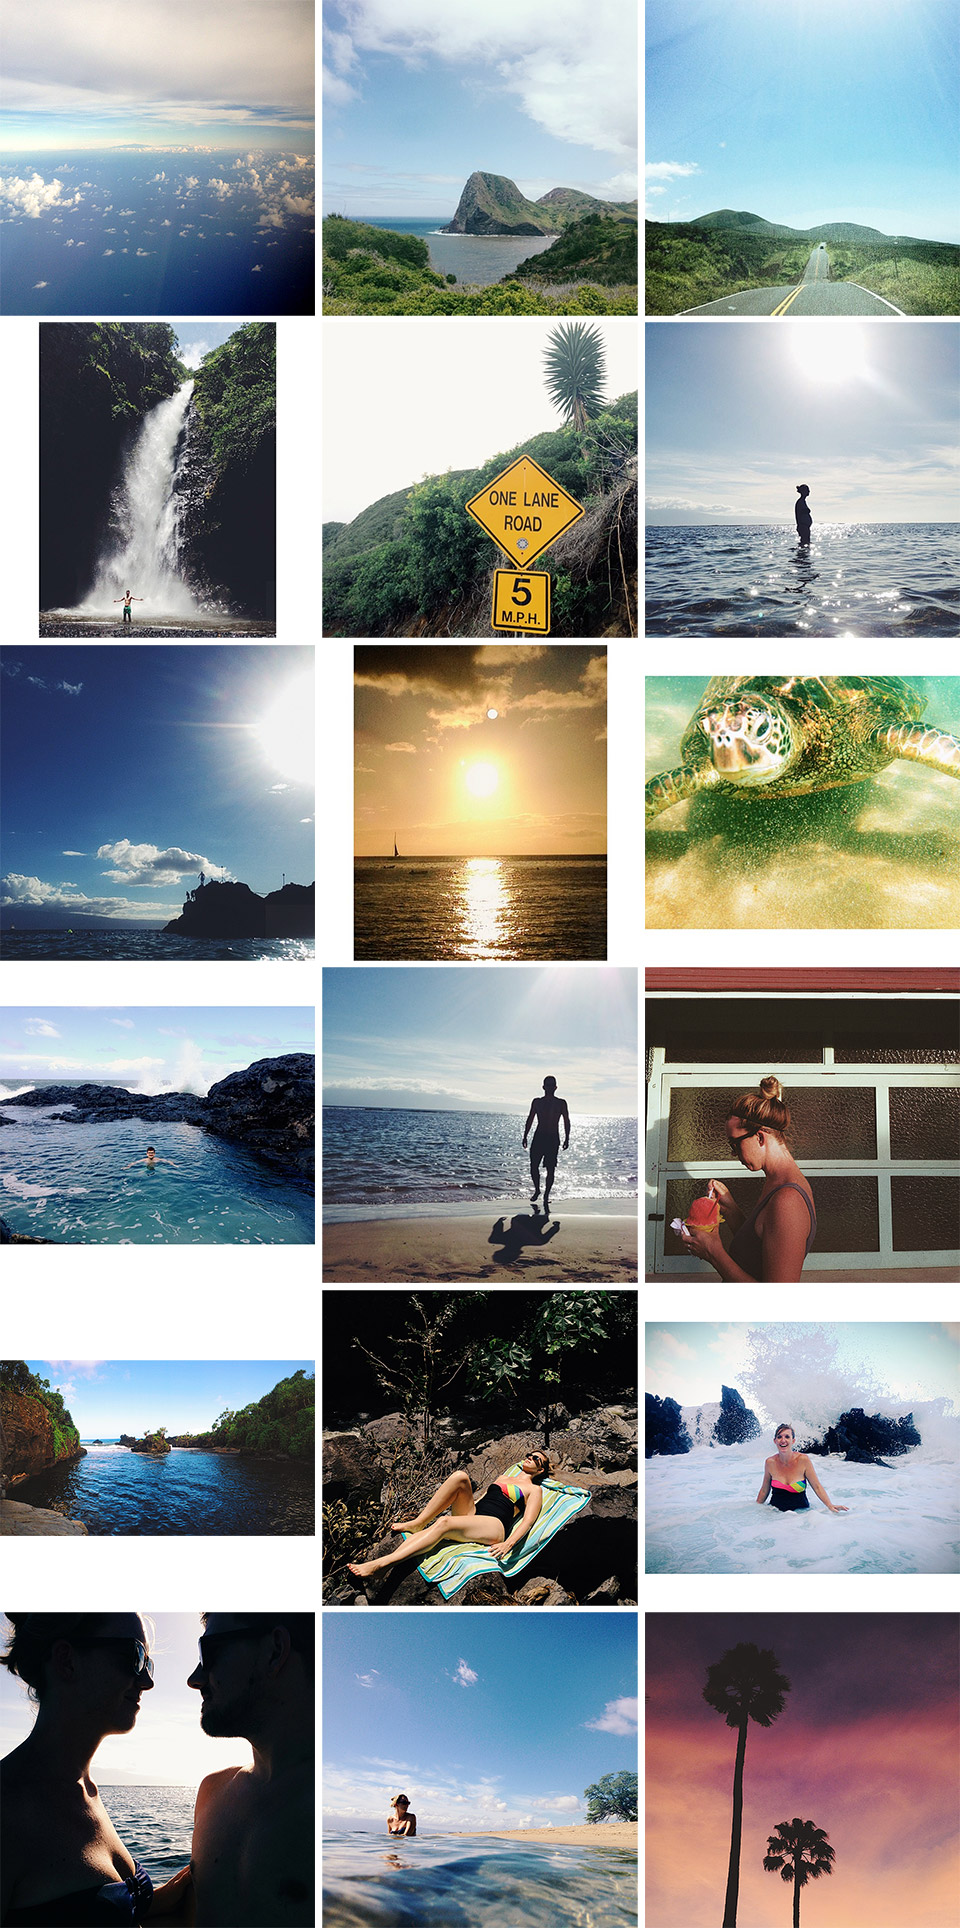 Our Instagram photos from Hawaii